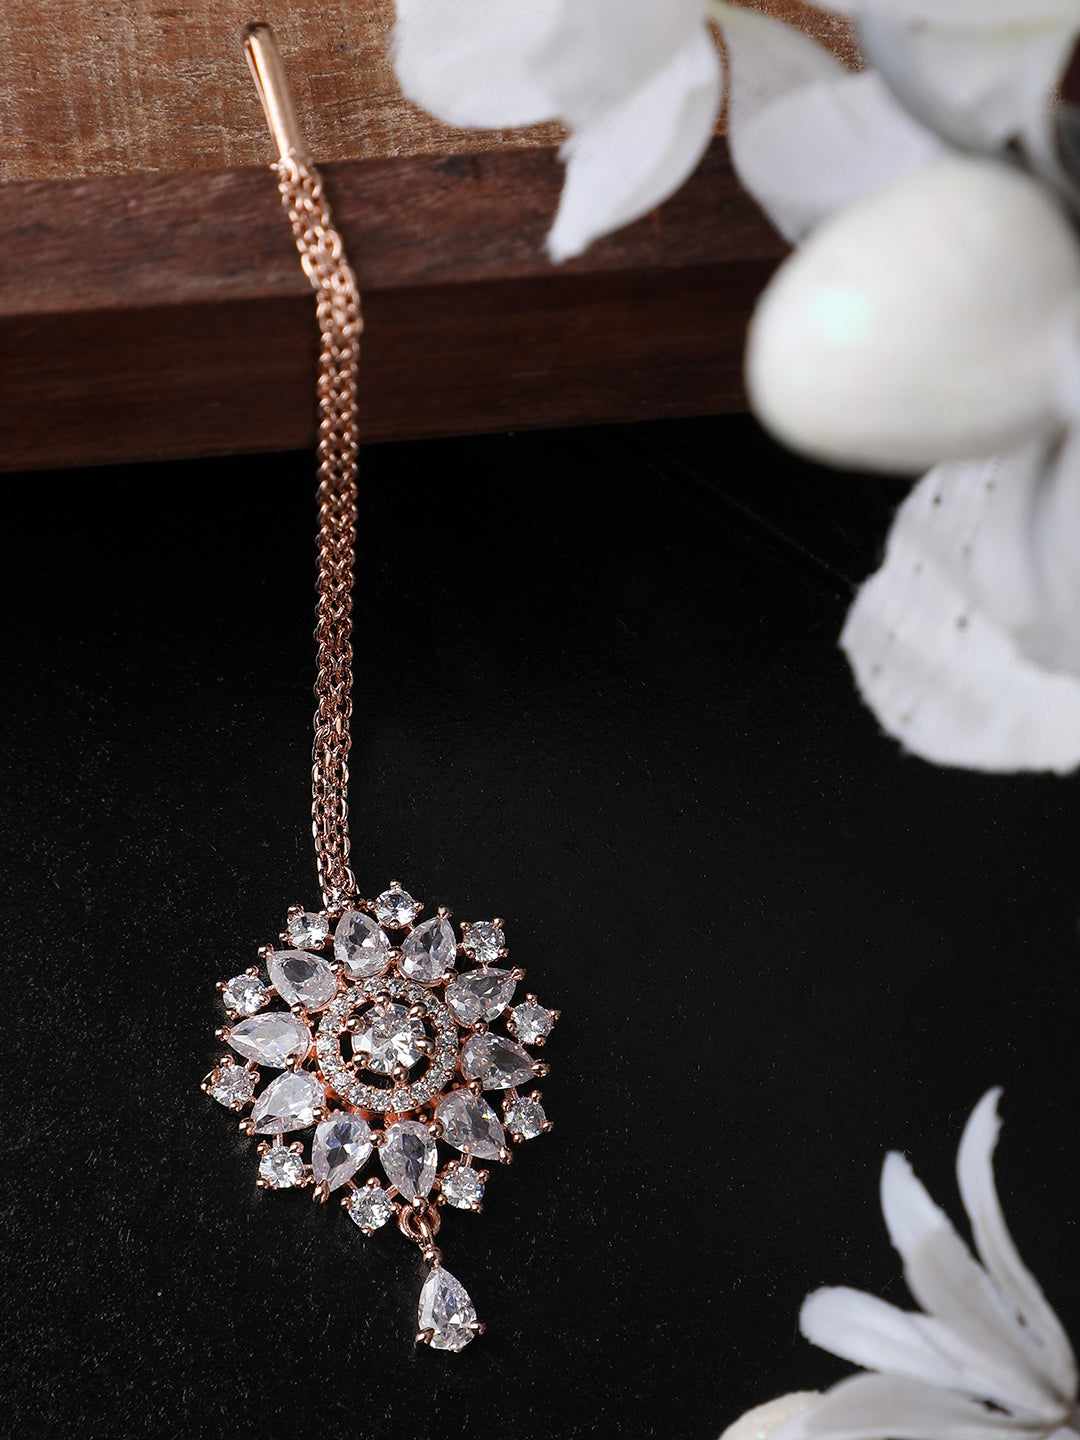 Women's Rose Gold-Plated White Cz & Ad-Studded Hand Crafted Maangtikka - Anikas Creation